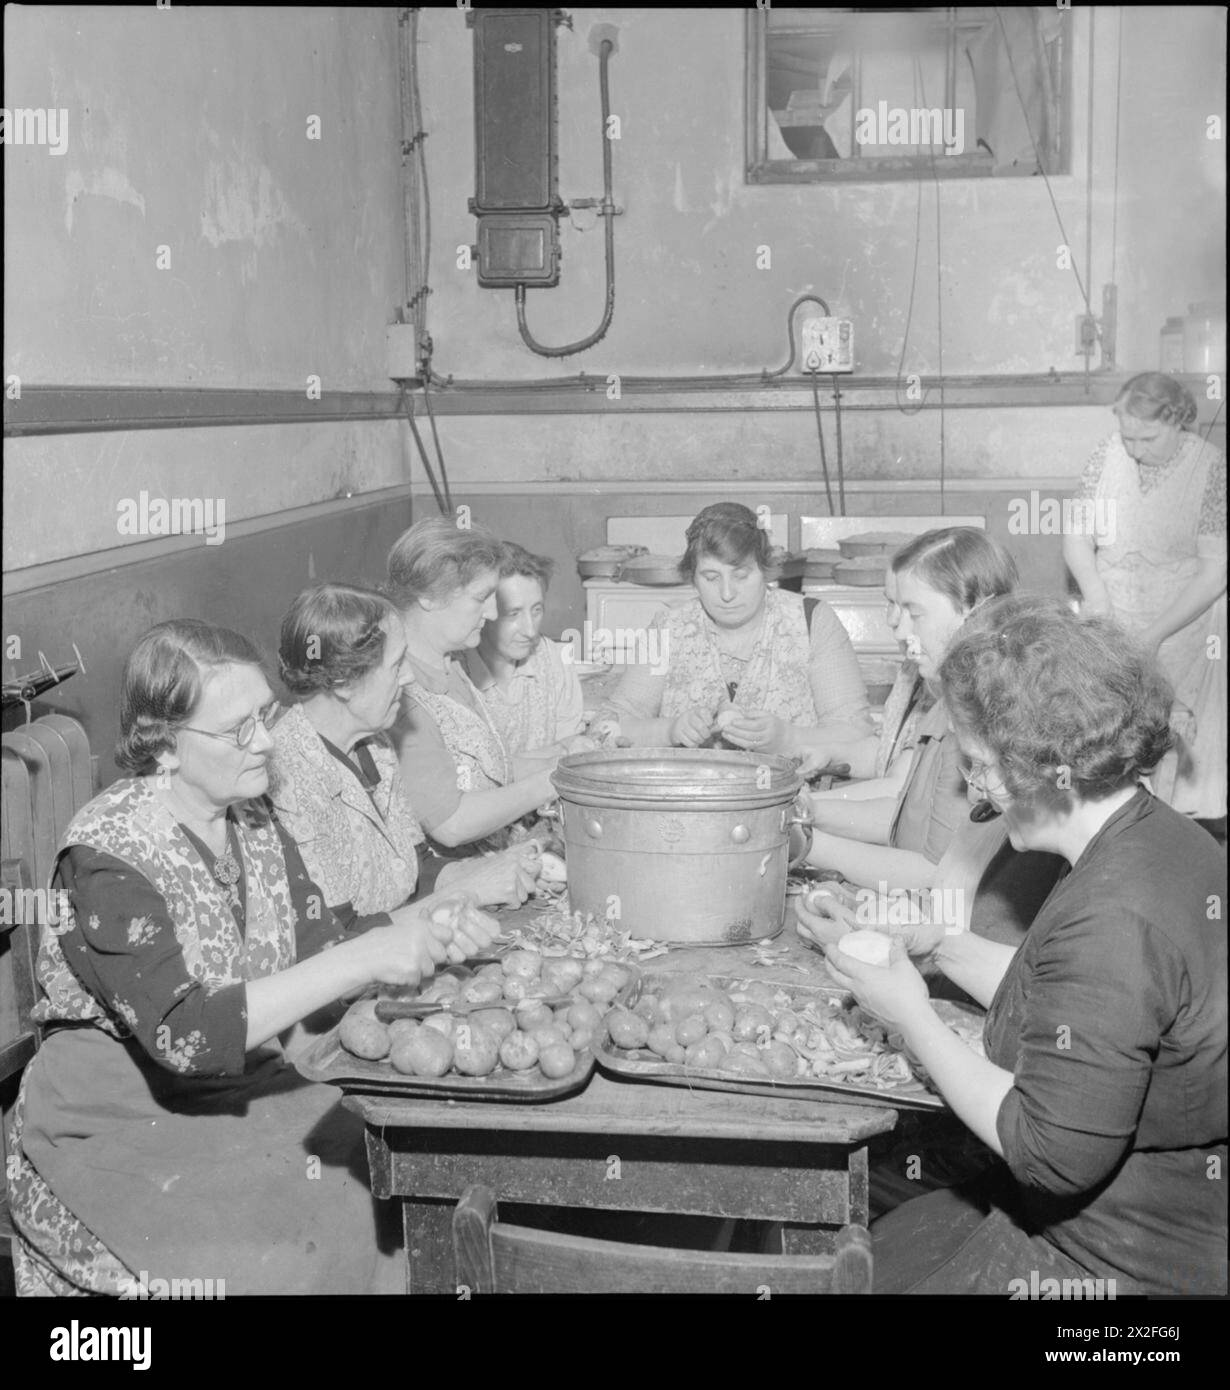 WOOLMORE STREET RESTAURANT: EATING OUT IN WARTIME LONDON, 1942 - Women at work preparing vegetables in the kitchen of the British Restaurant at Woolmore Street. Left to right they are: Mrs F Malyon (aged 59), Mrs C Pude (aged 64, a cigar worker in peacetime), Mrs Florence Skinner, Mrs Davison (once demonstrated cleaning materials), Mrs J Harrop (ran a corn chandler and grocer's store), Doris Prigge (previously in the catering trade), Miss Barkwith, Miss Violet Hancock and Mrs Turley. Another woman can be seen in the background Stock Photo